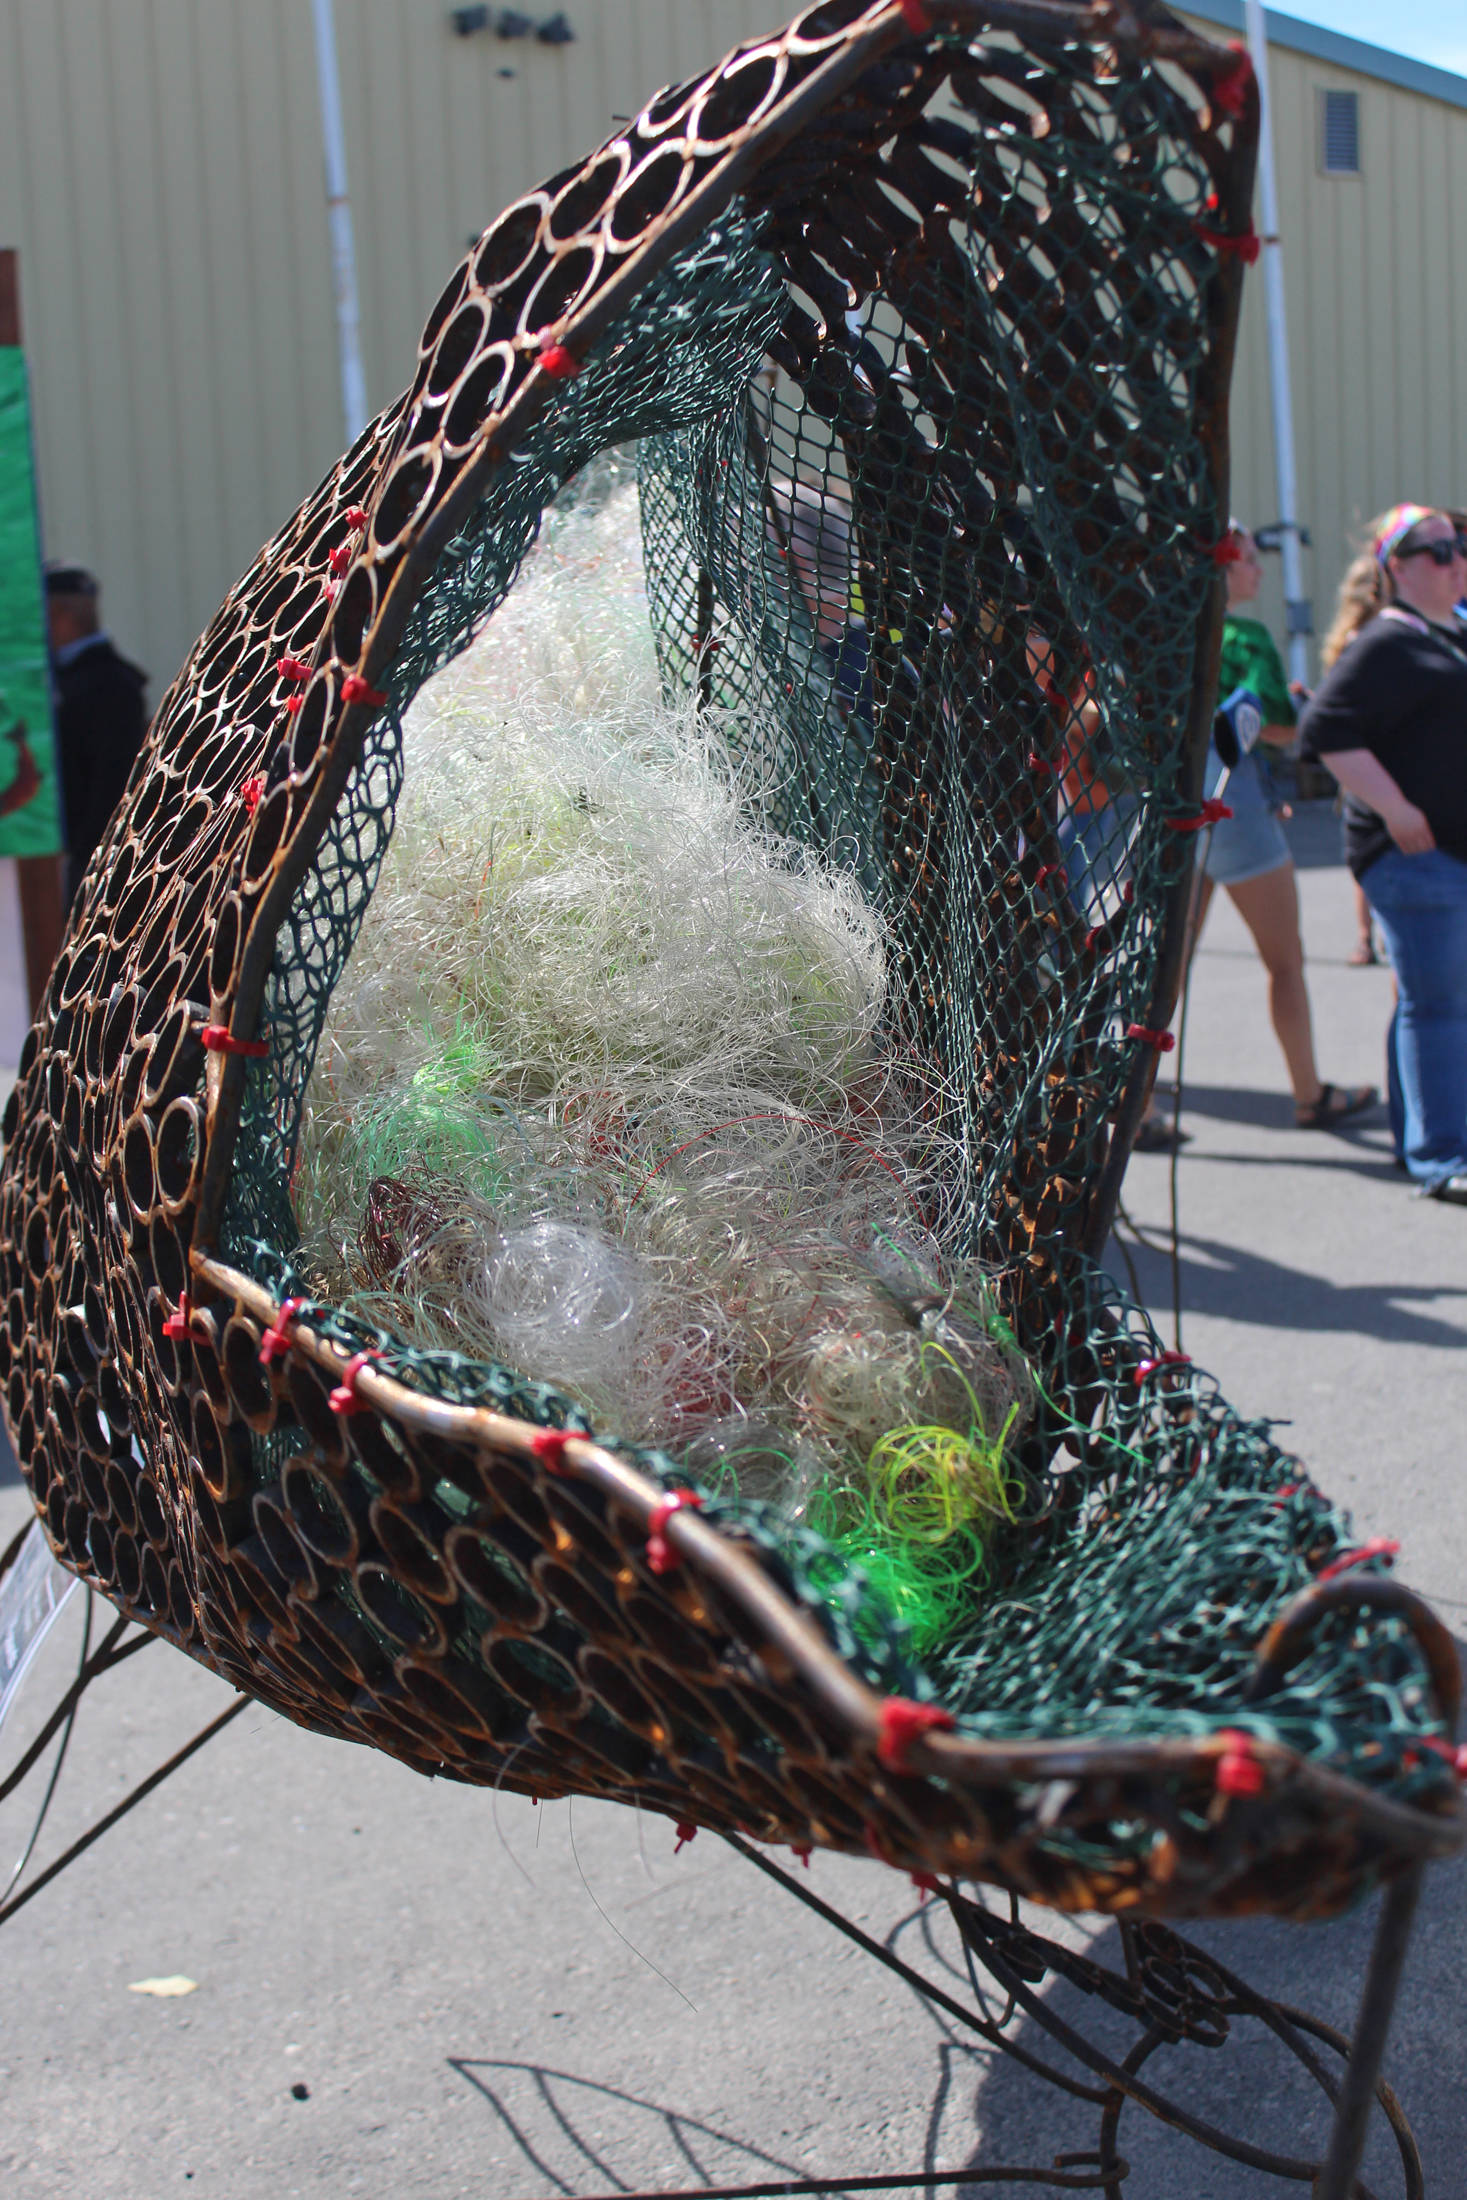 “Sally,” a salmon statue in front of the Kenai Watershed tent, serves as a reminder to passersby about the importance of keeping the oceans clean of fishing line on Friday, Aug. 2, 2019 at Salmonfest in Ninilchik, Alaska. (Photo by Megan Pacer/Homer News)